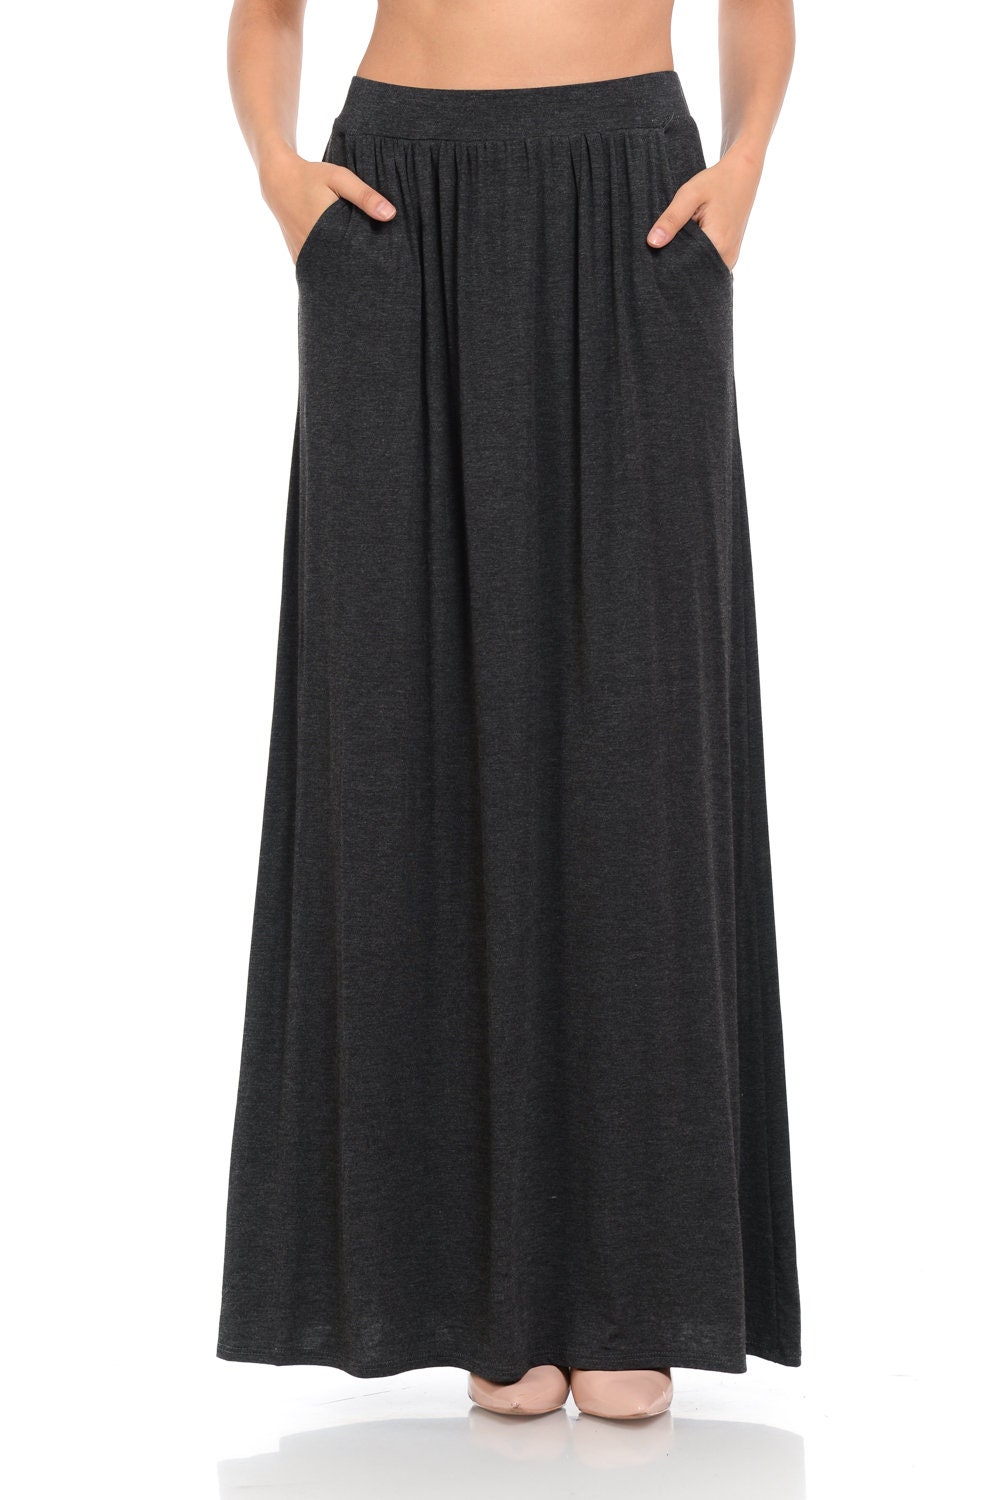 Maxi Skirt With Elastic Waistband and Pockets Charcoal - Etsy